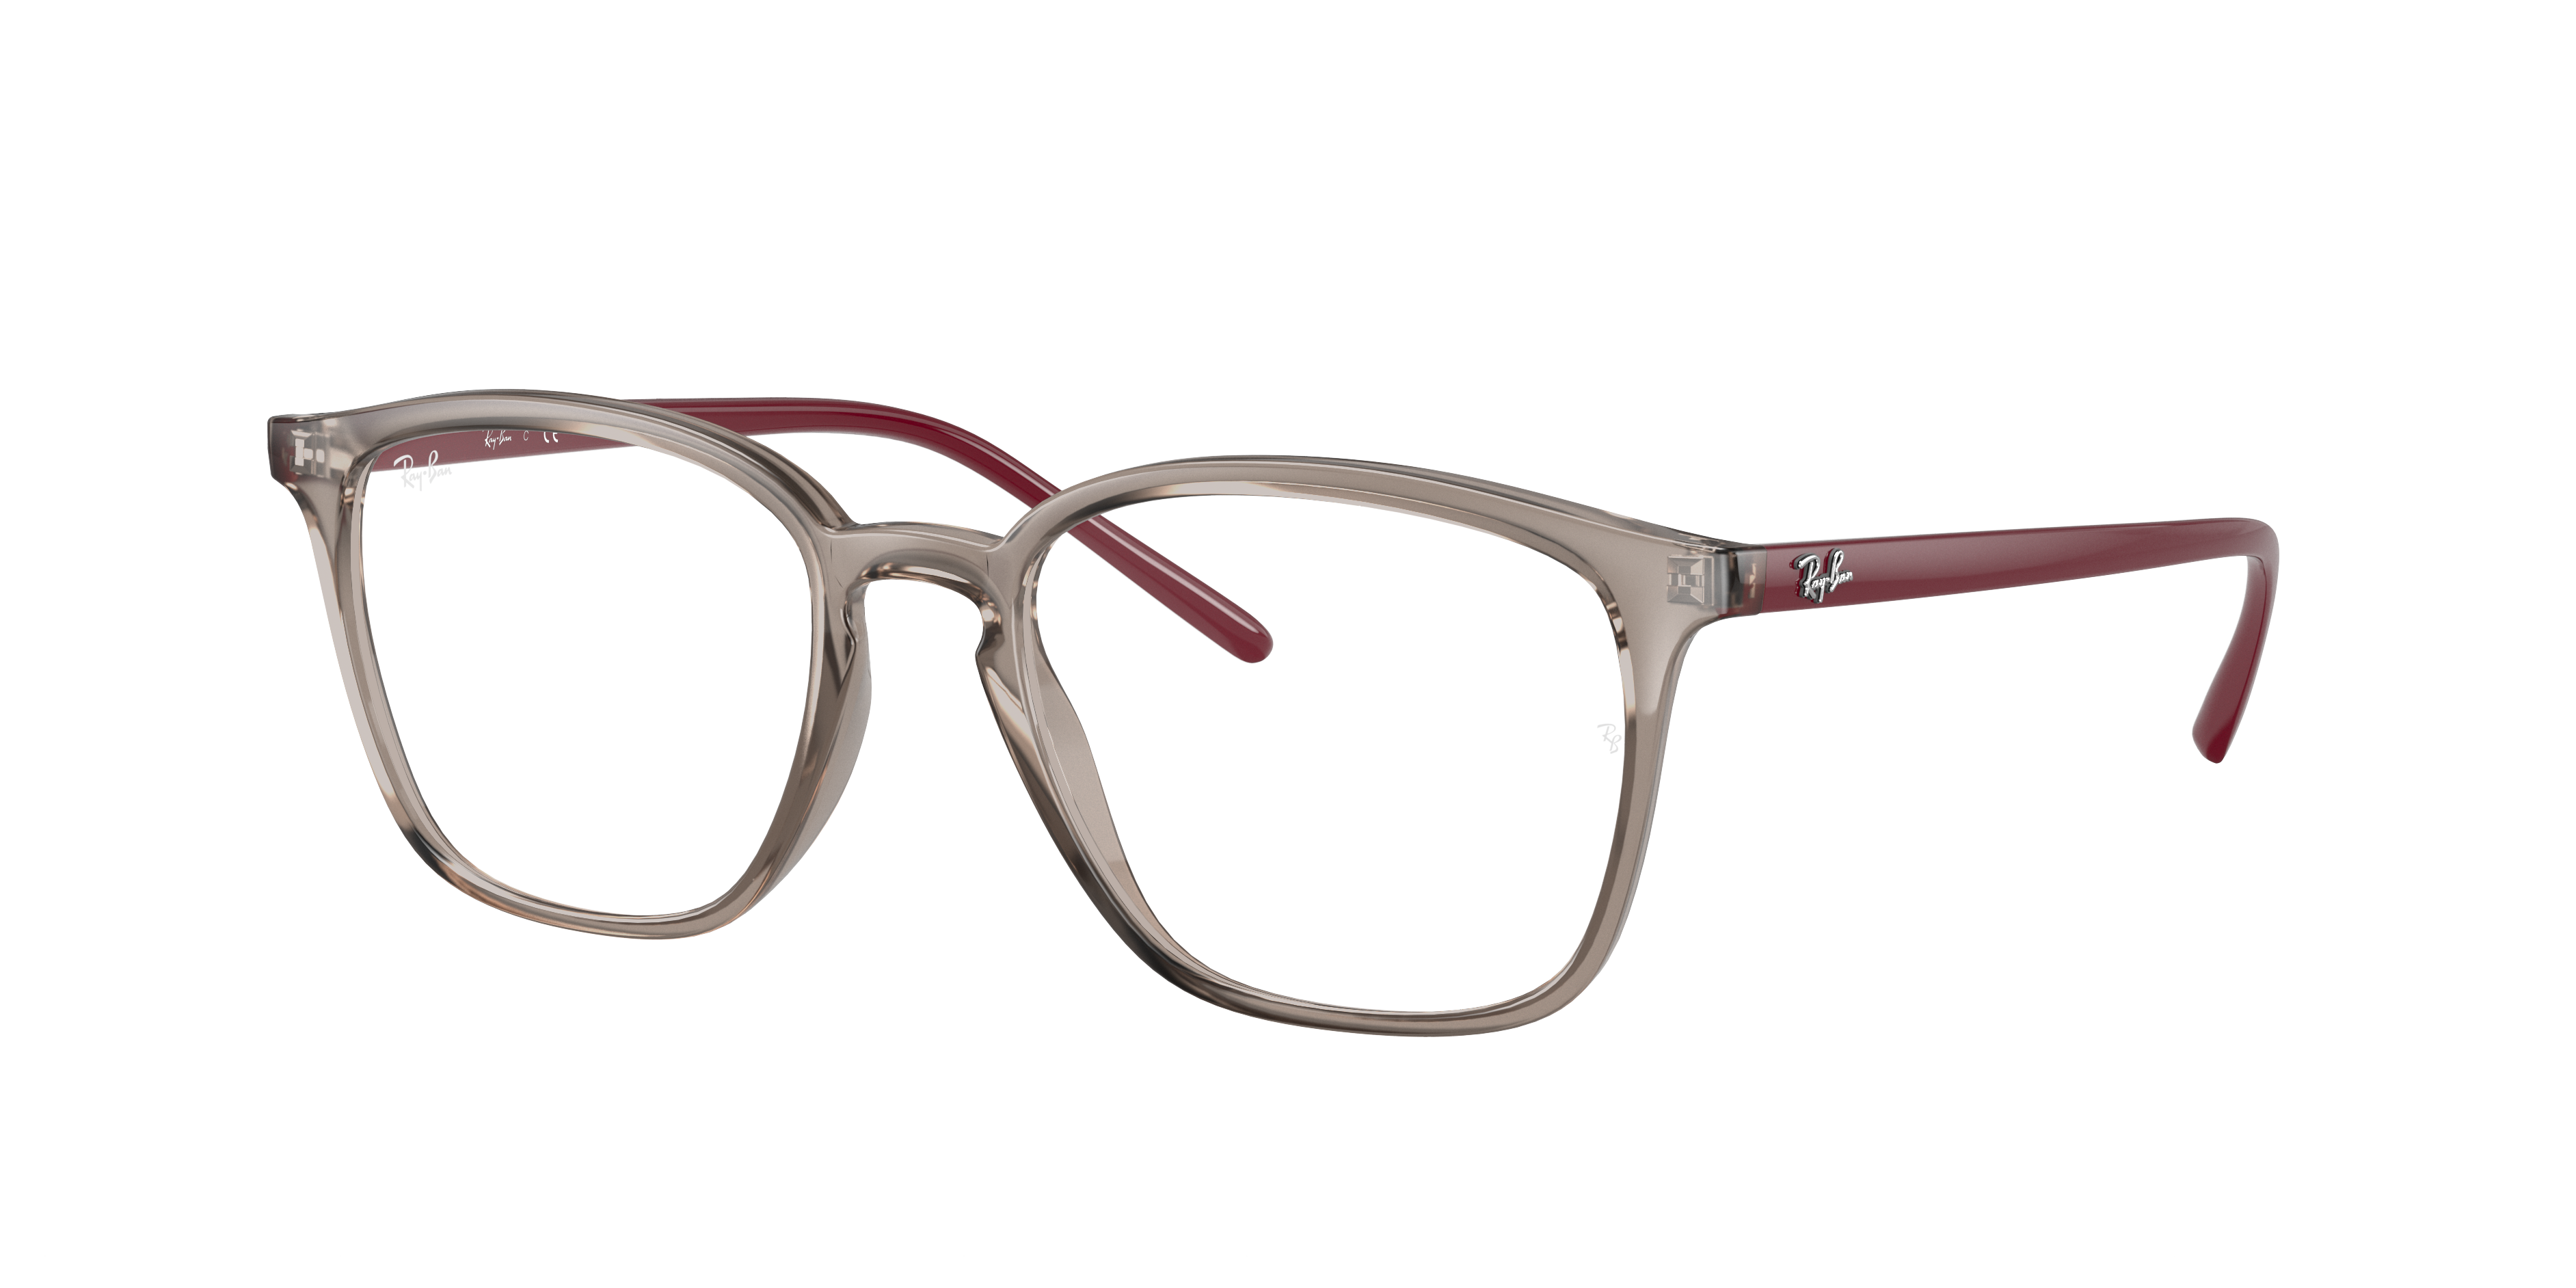 Rb7185 Eyeglasses with Transparent Grey Frame | Ray-Ban®